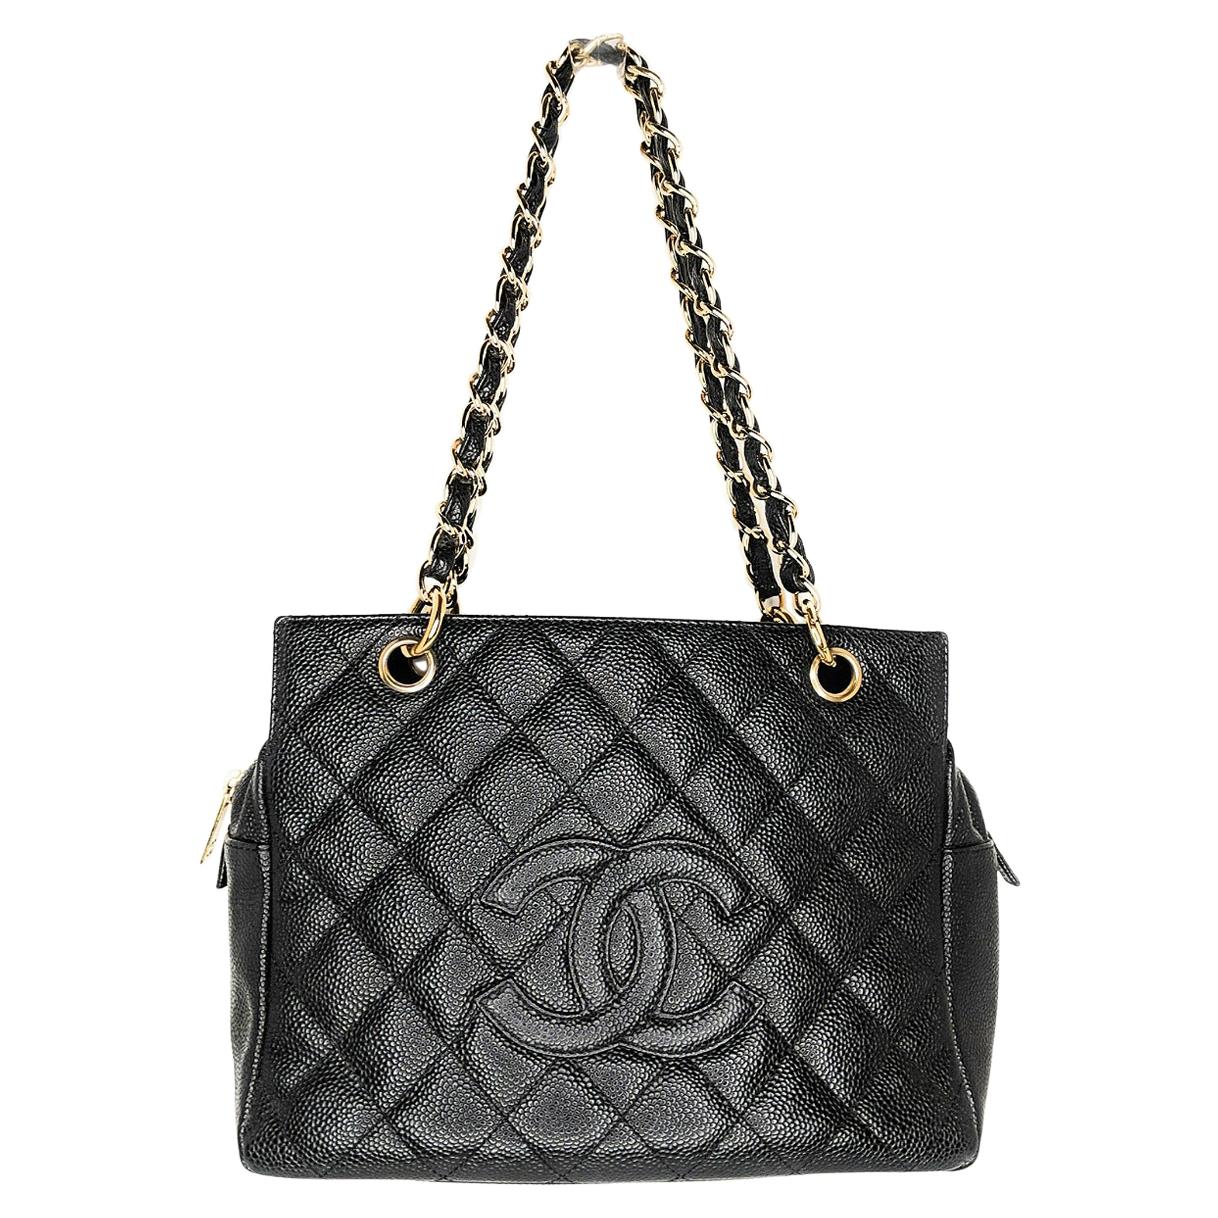 Chanel Vintage Caviar Timeless Shopping Tote Bag